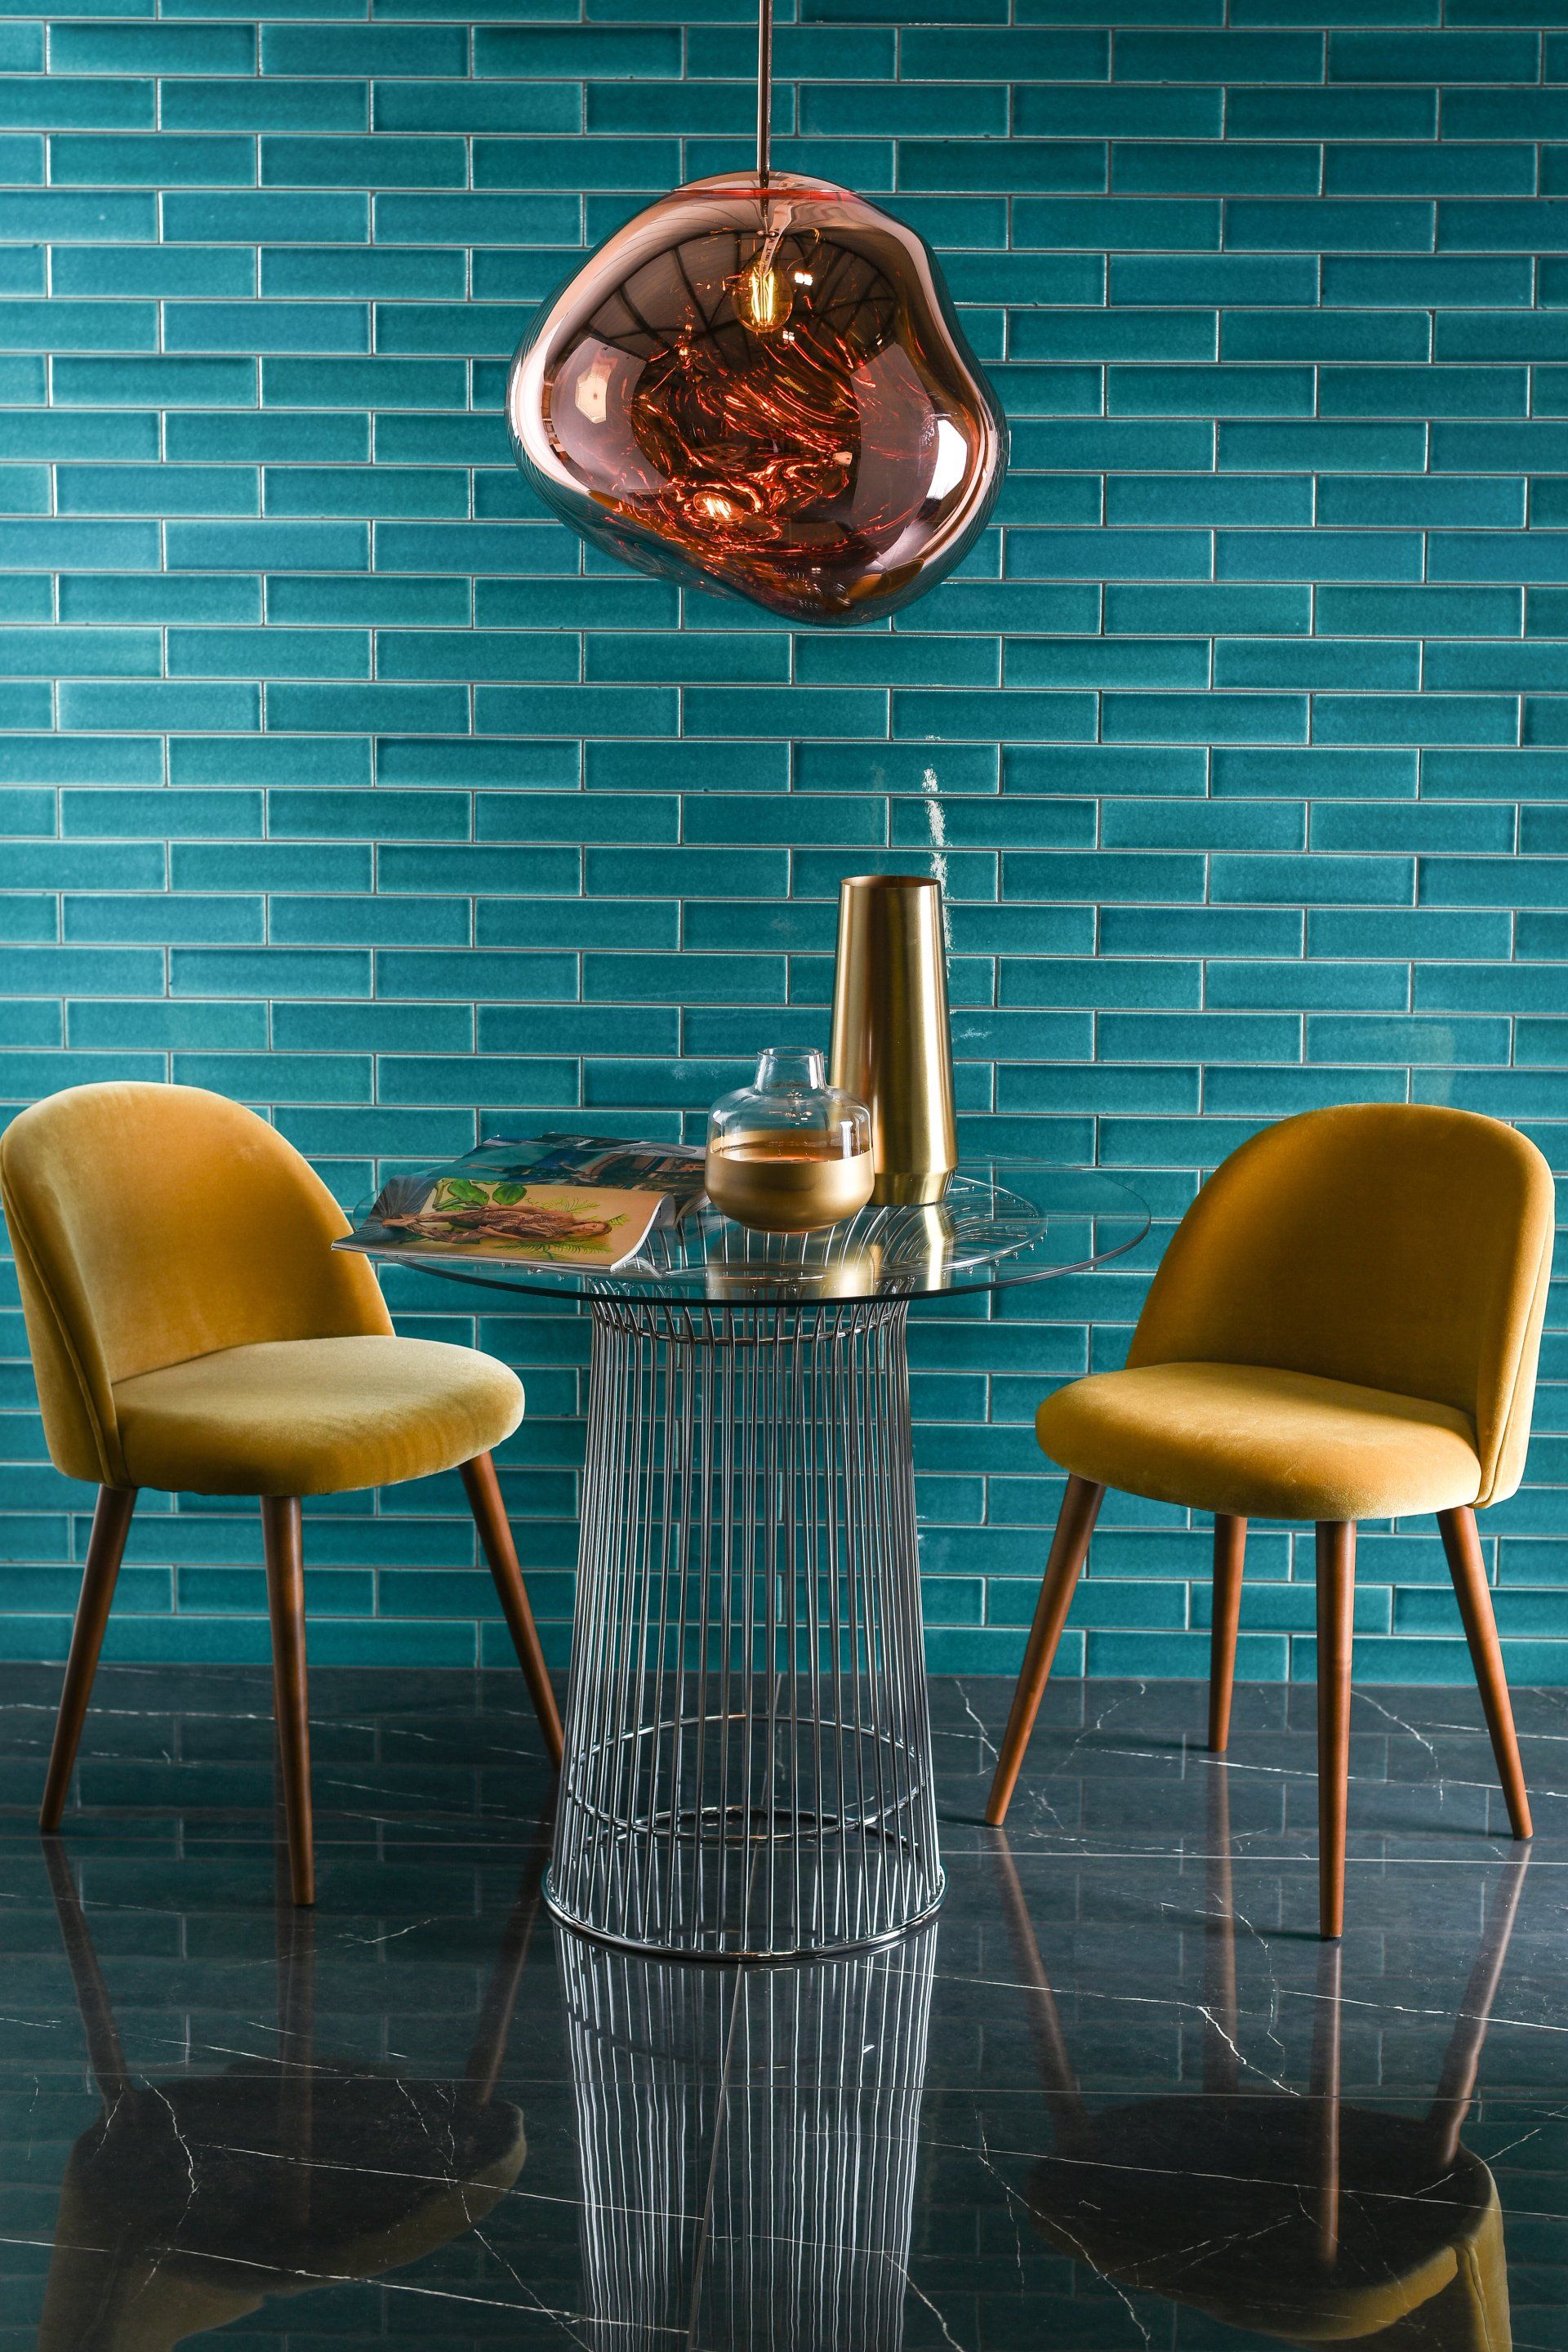 A beautifully tiled wall with two chairs near to it